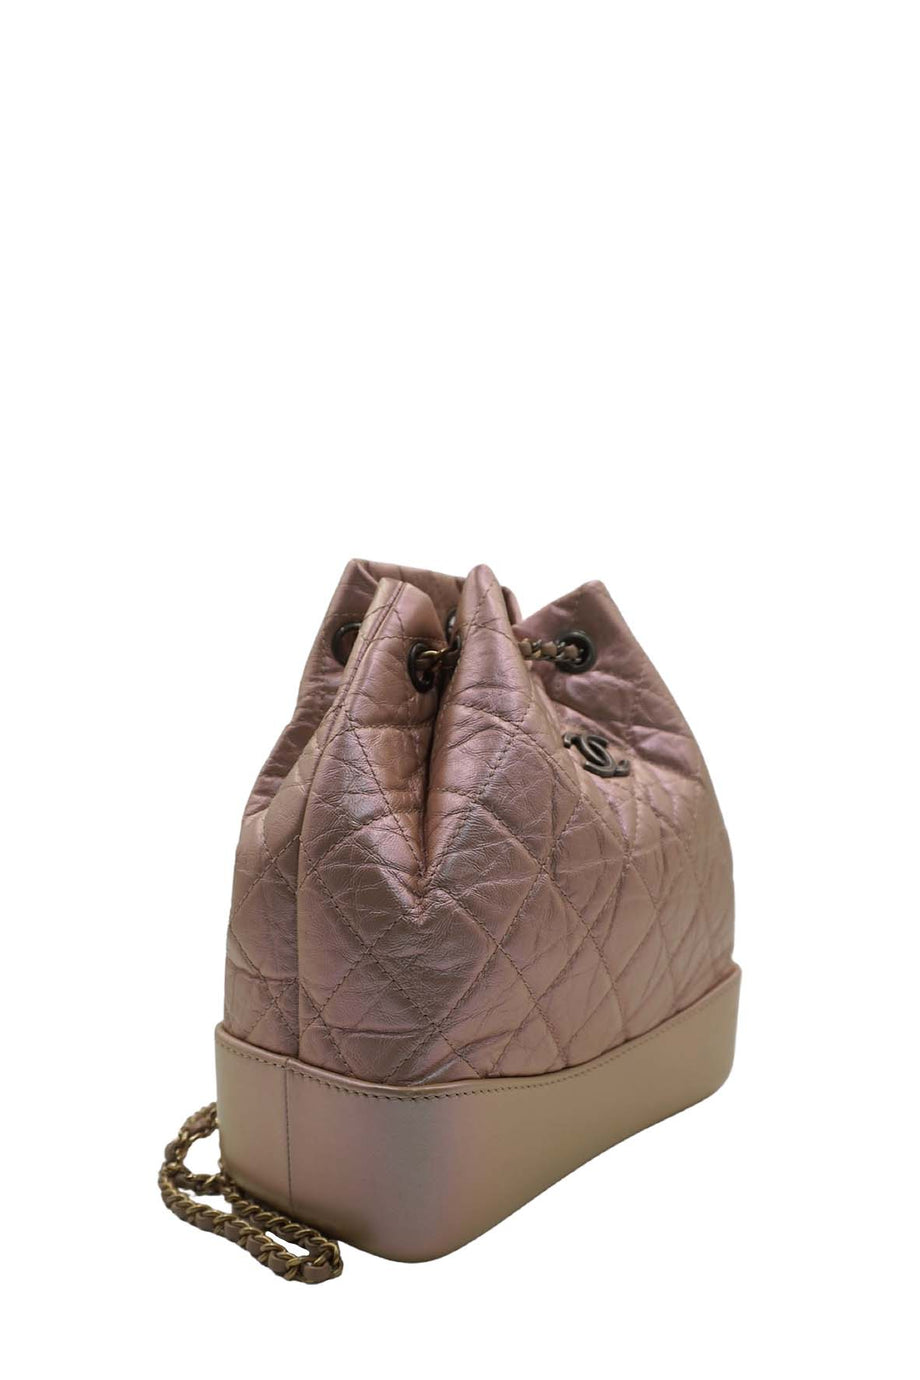 Chanel Iridescent Gabrielle Backpack